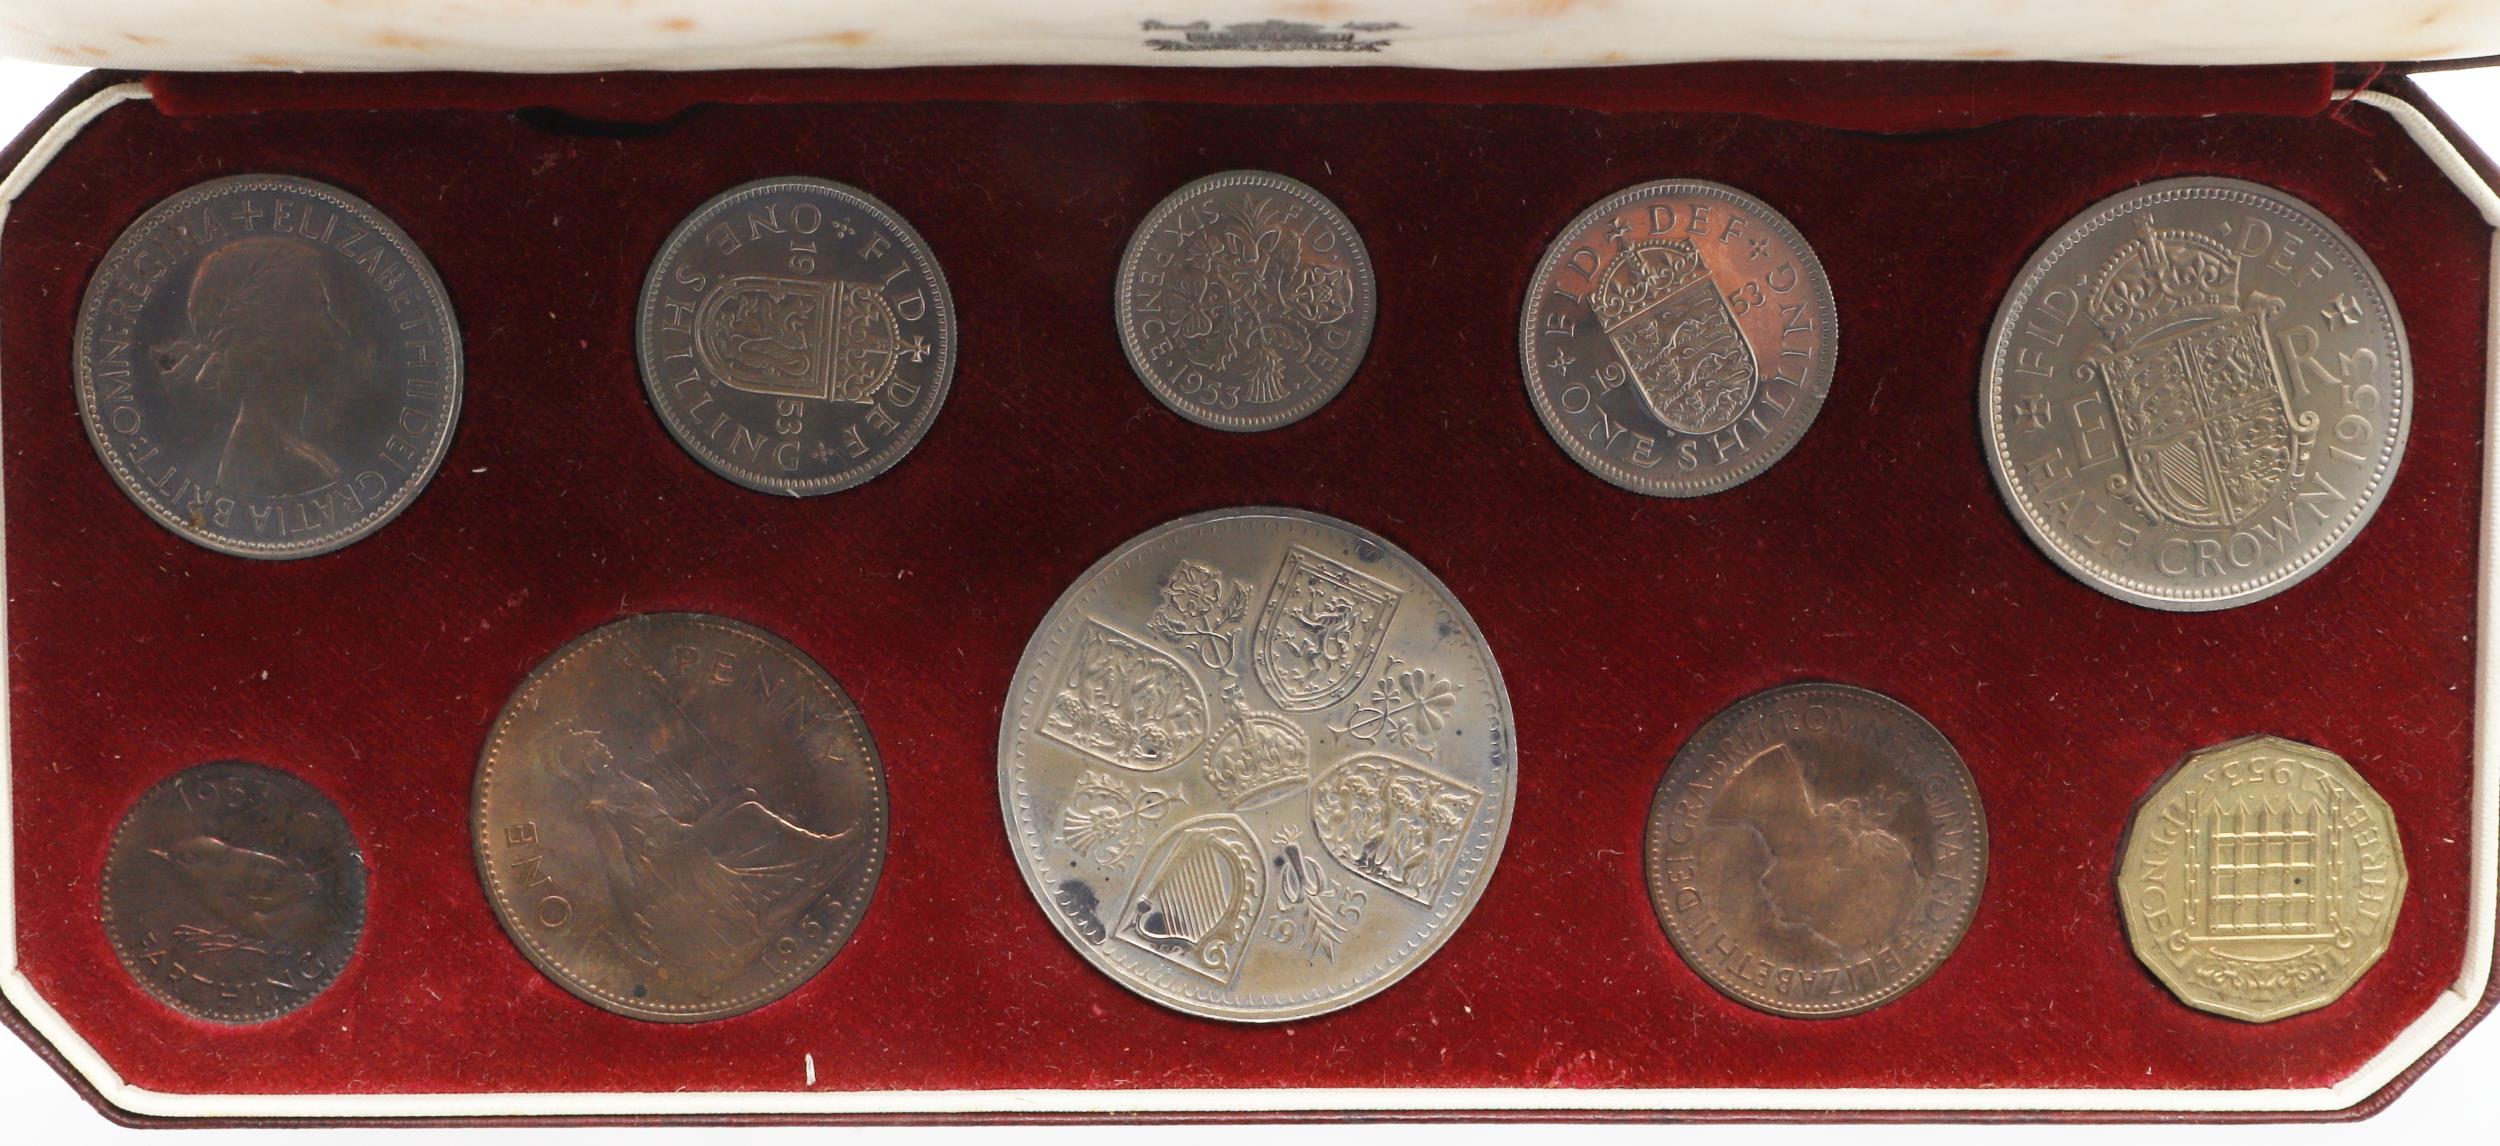 THREE MID 20TH CENTURY SPECIMEN COIN SETS, 1950, 1951 AND 1953. - Image 8 of 11